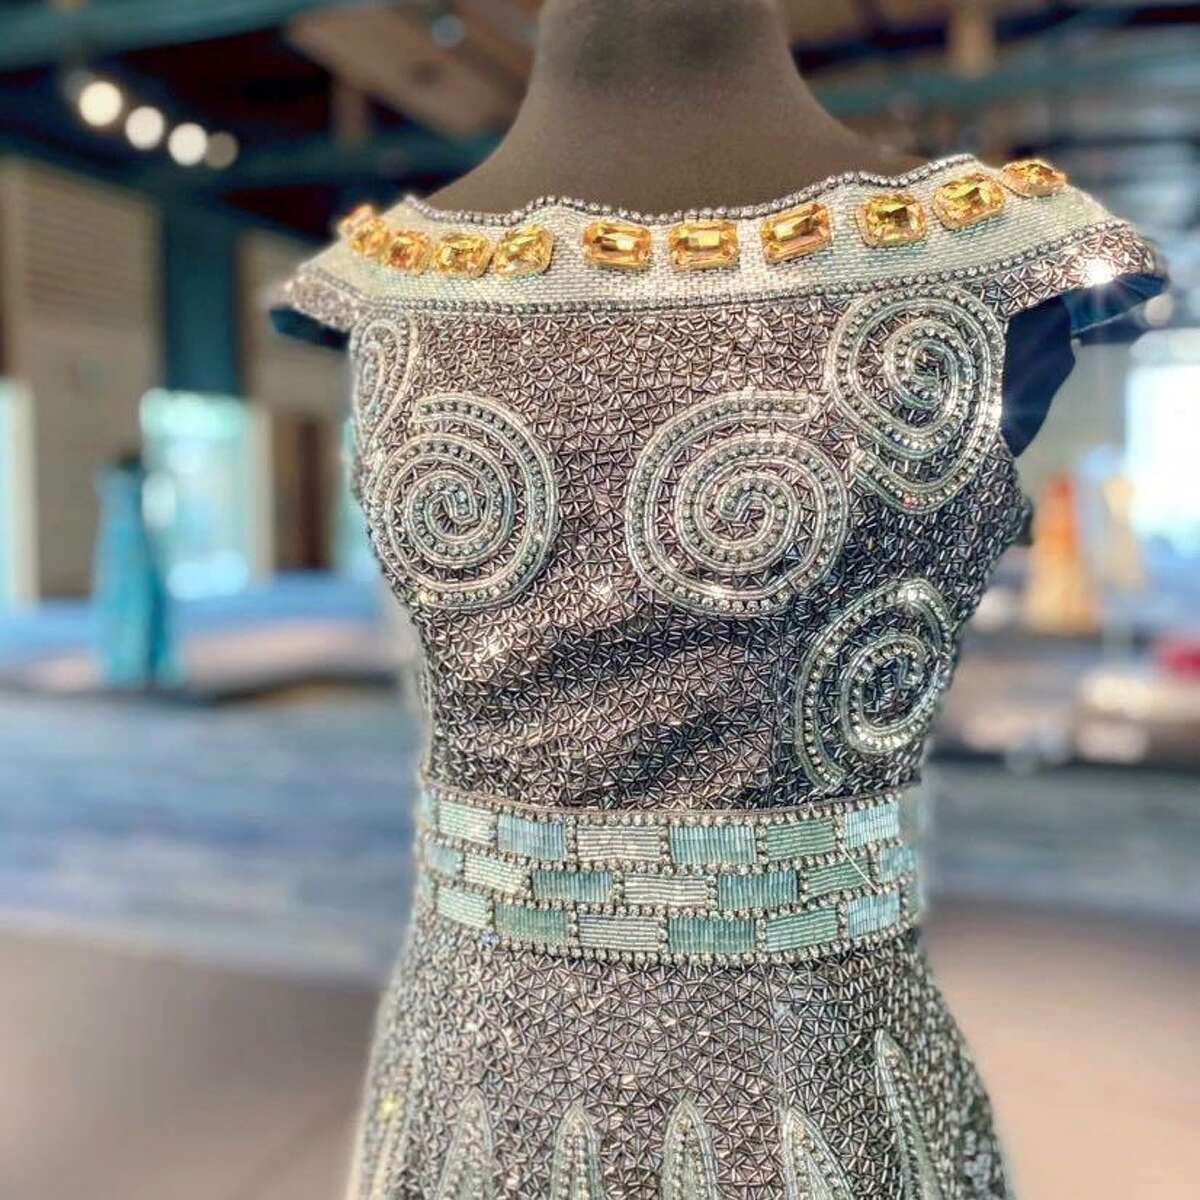 2021 gowns of Fiesta’s Order of the Alamo Coronation to be displayed at